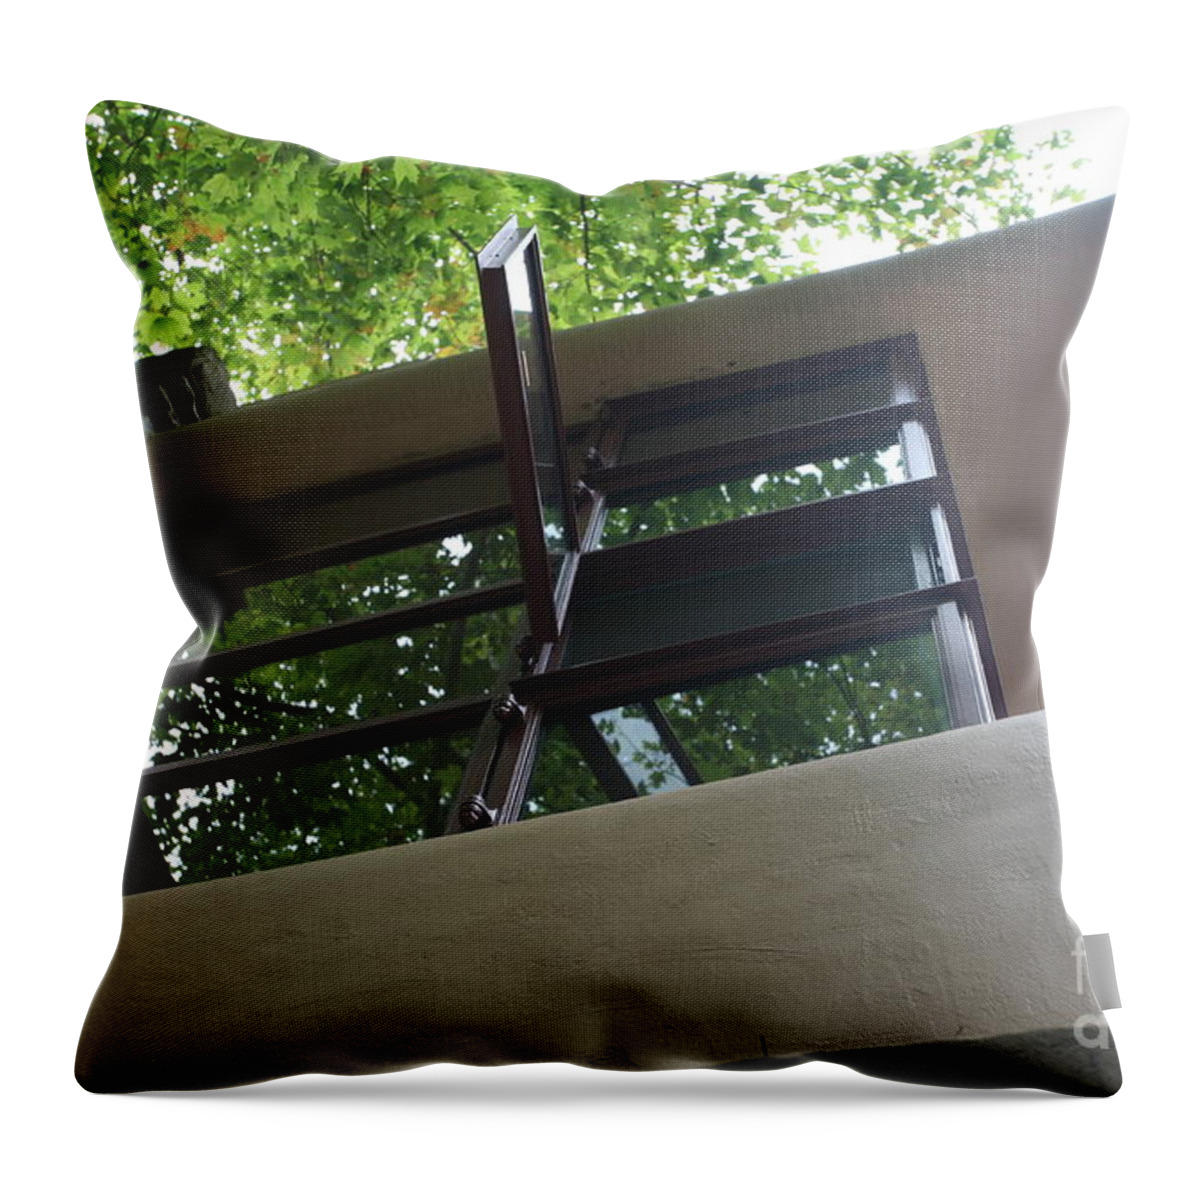 Falling Water Throw Pillow featuring the photograph Windows FallingWater by Chuck Kuhn